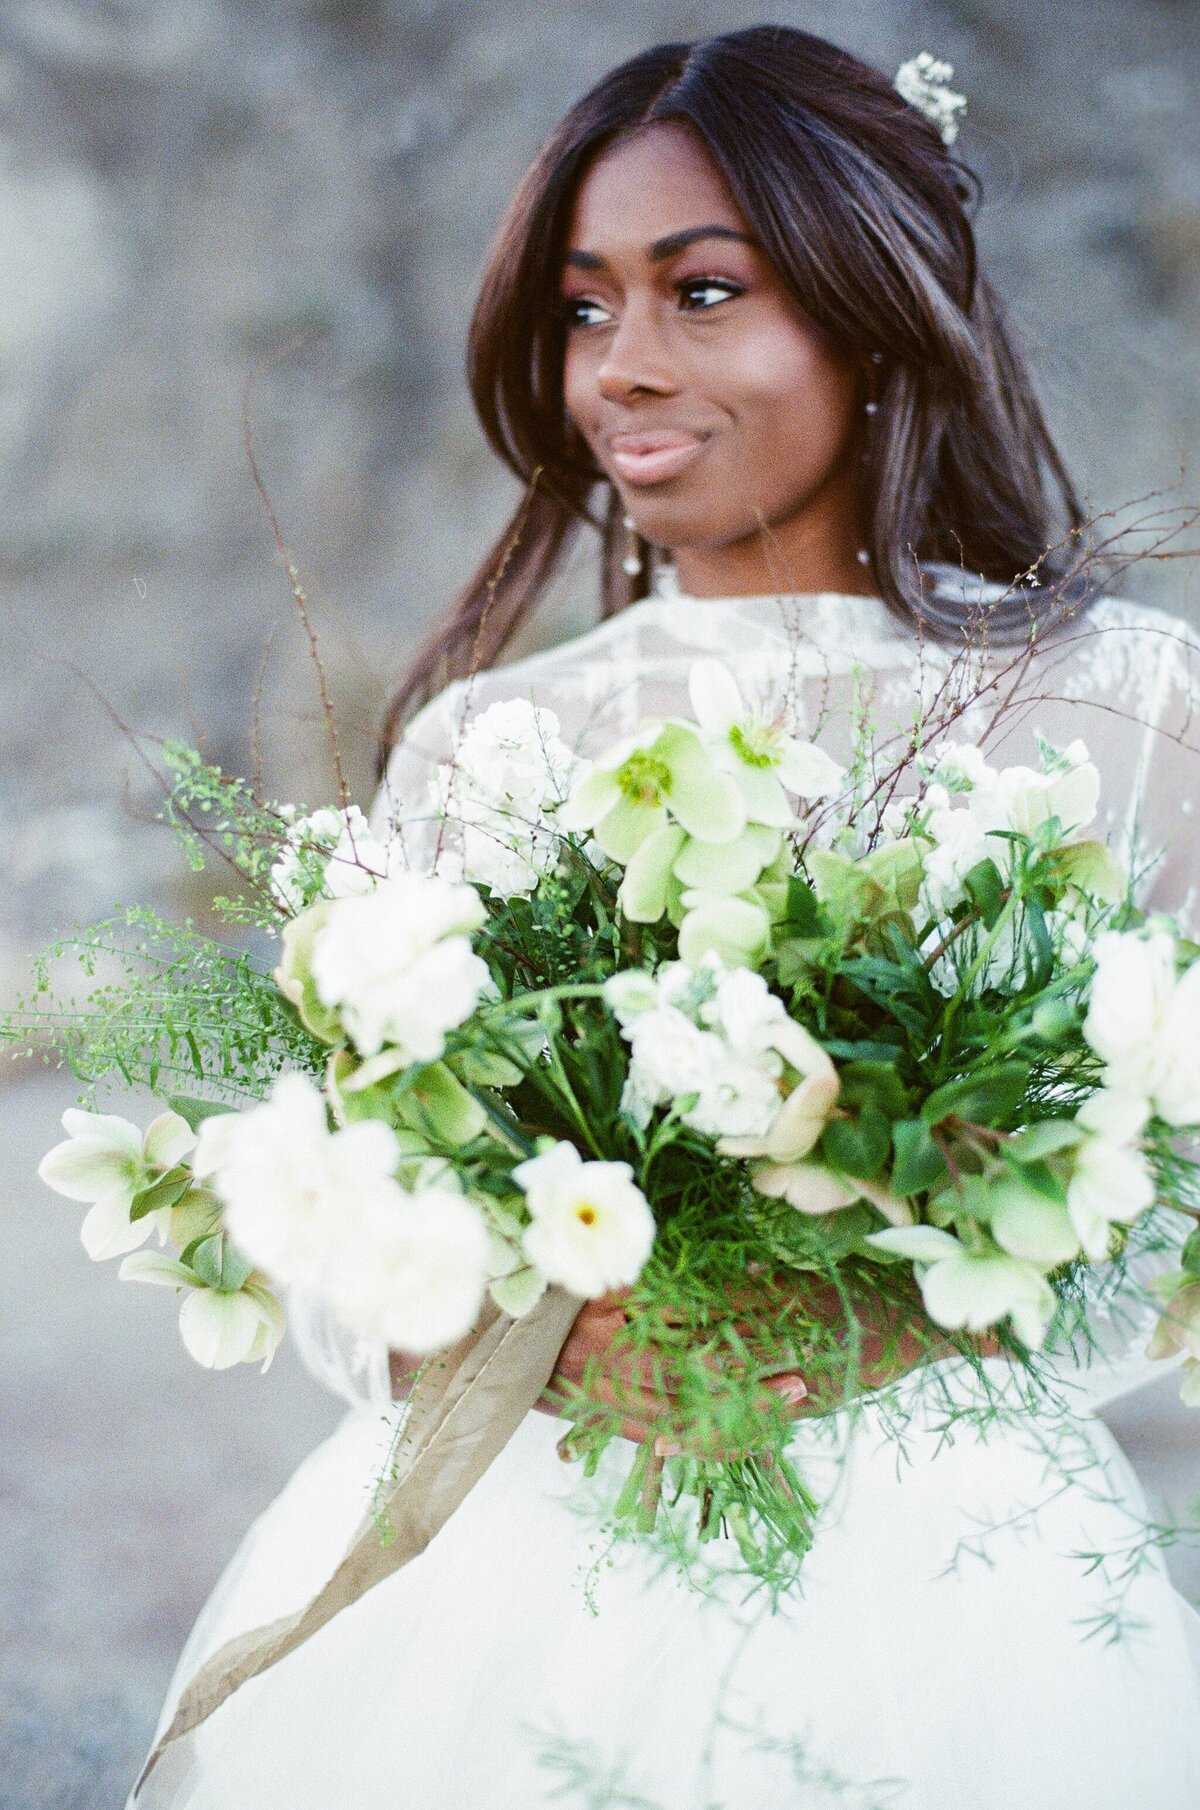 A bride with dark skin, wearing a white wedding gown and holding a bouquet of white flowers, gazes into the distance during her portrait session.